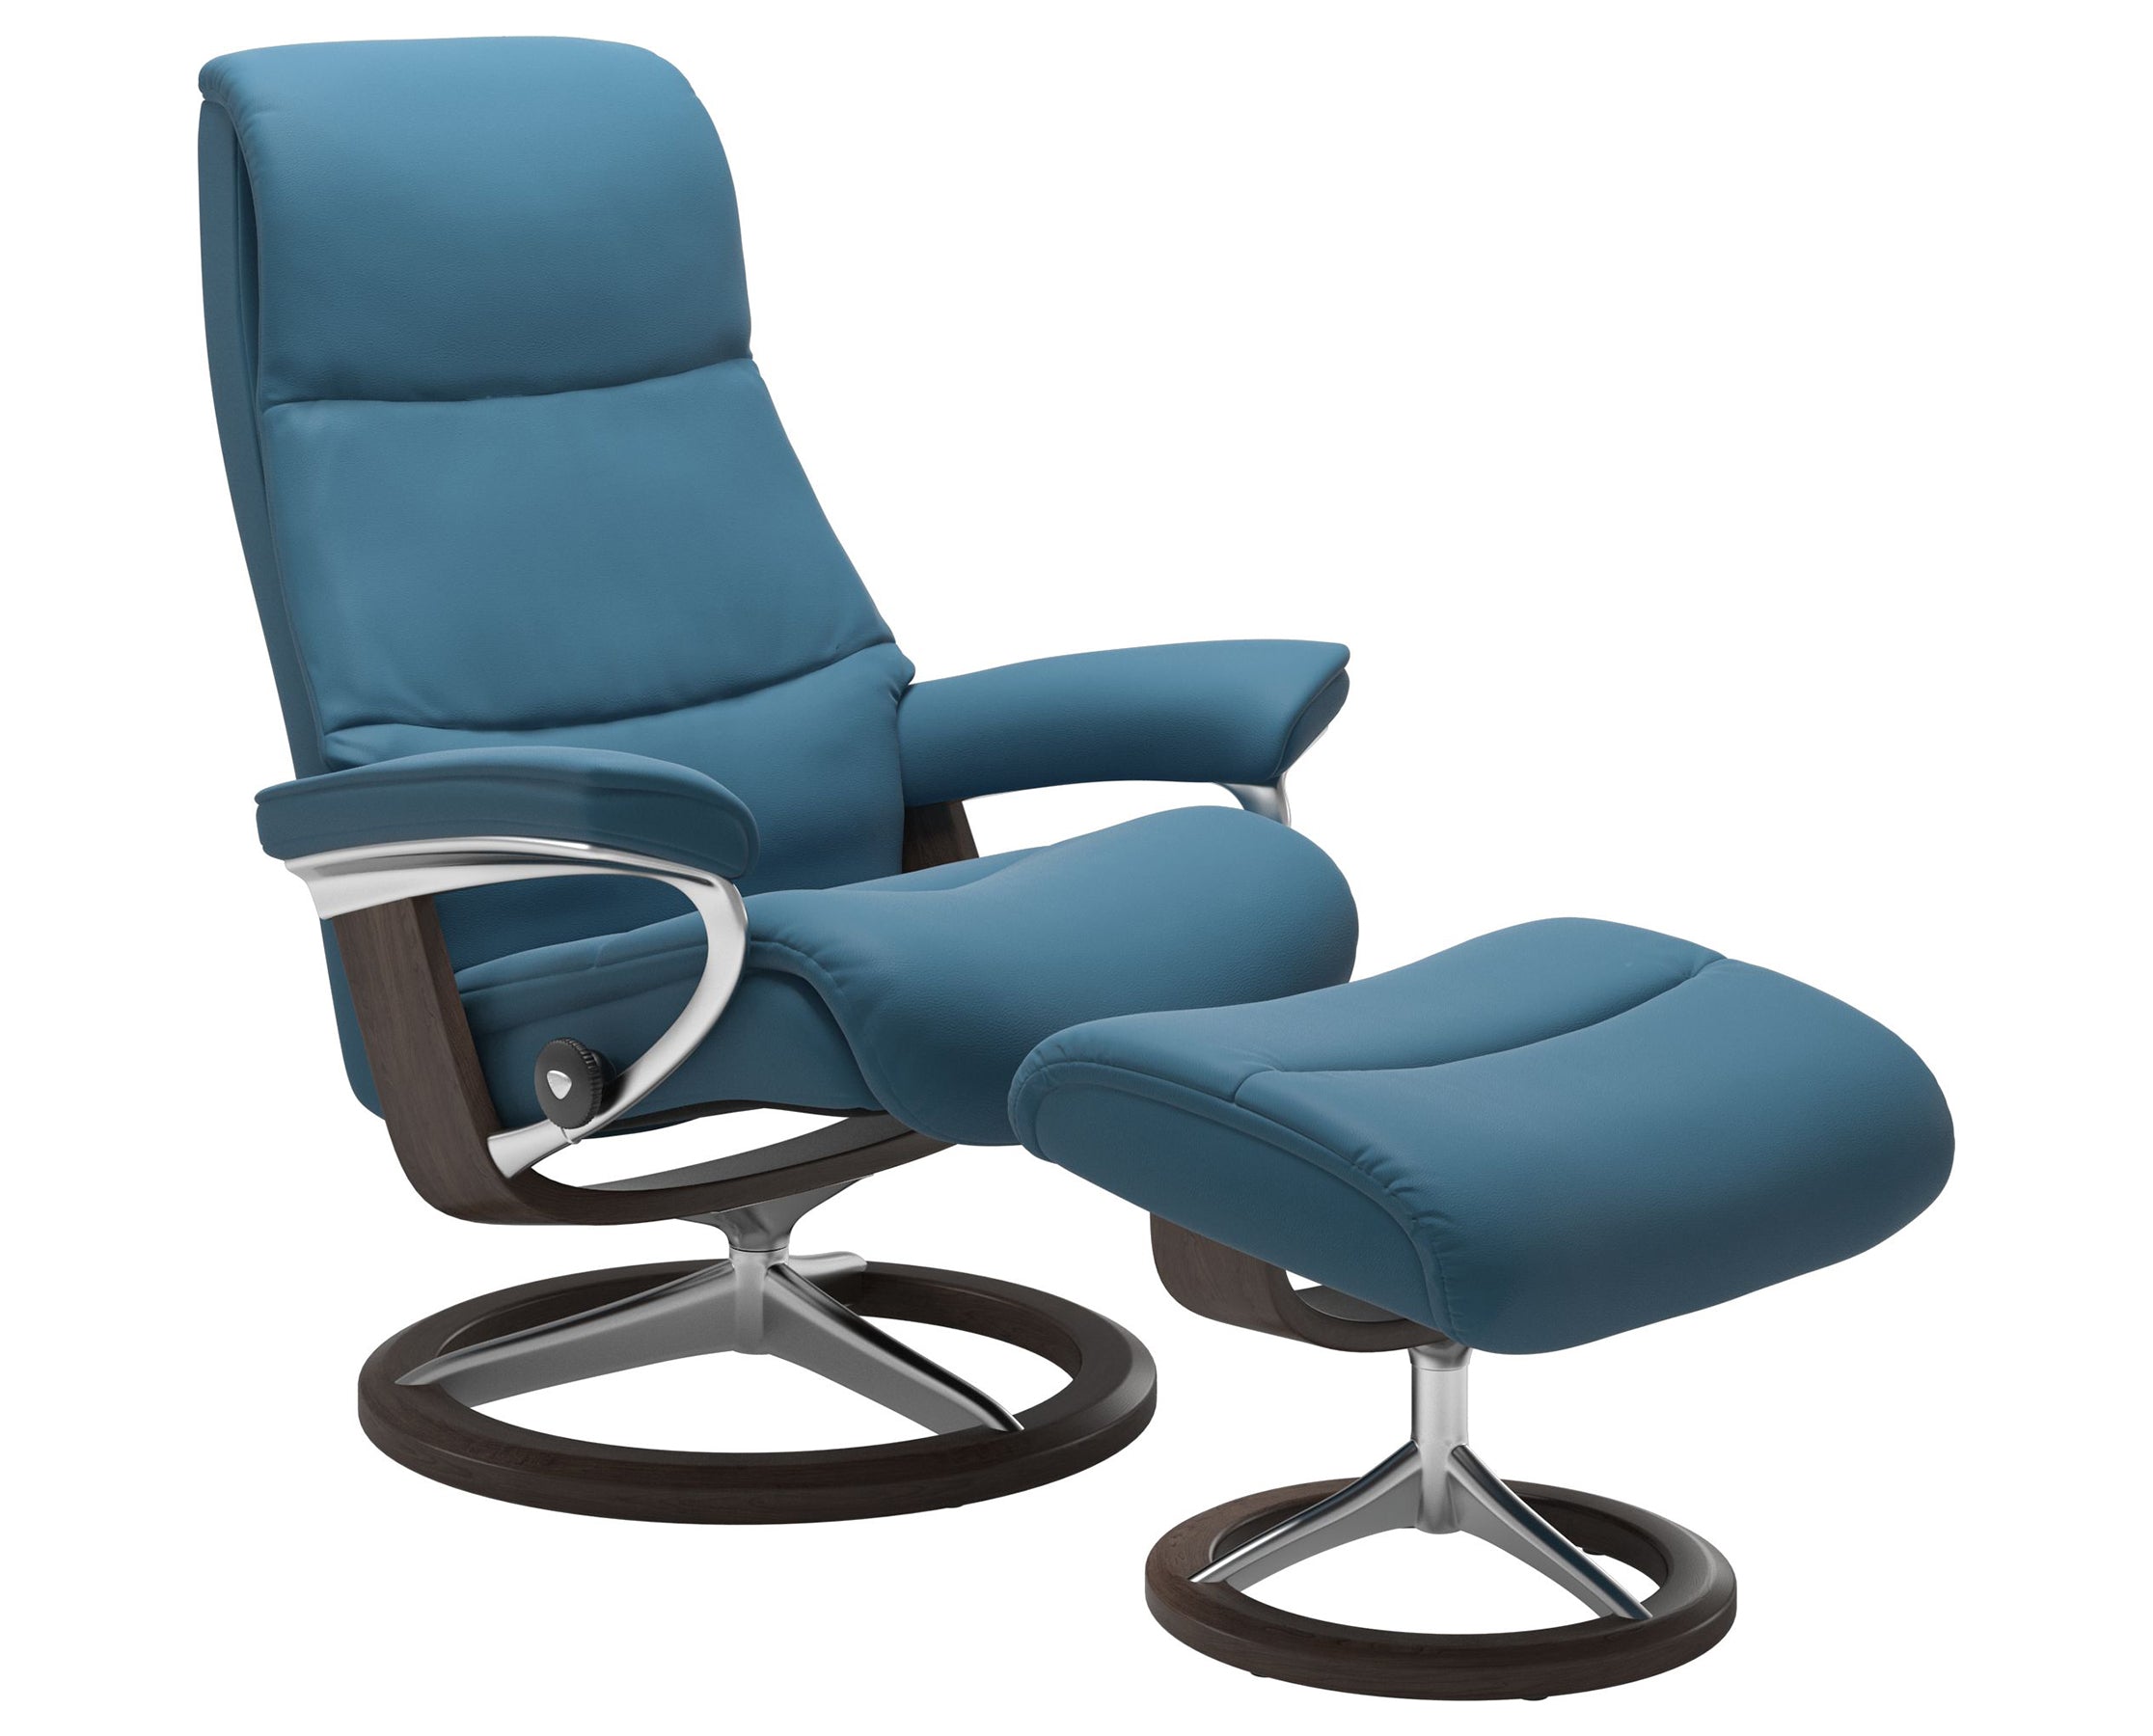 Paloma Leather Crystal Blue S/M/L and Wenge Base | Stressless View Signature Recliner | Valley Ridge Furniture